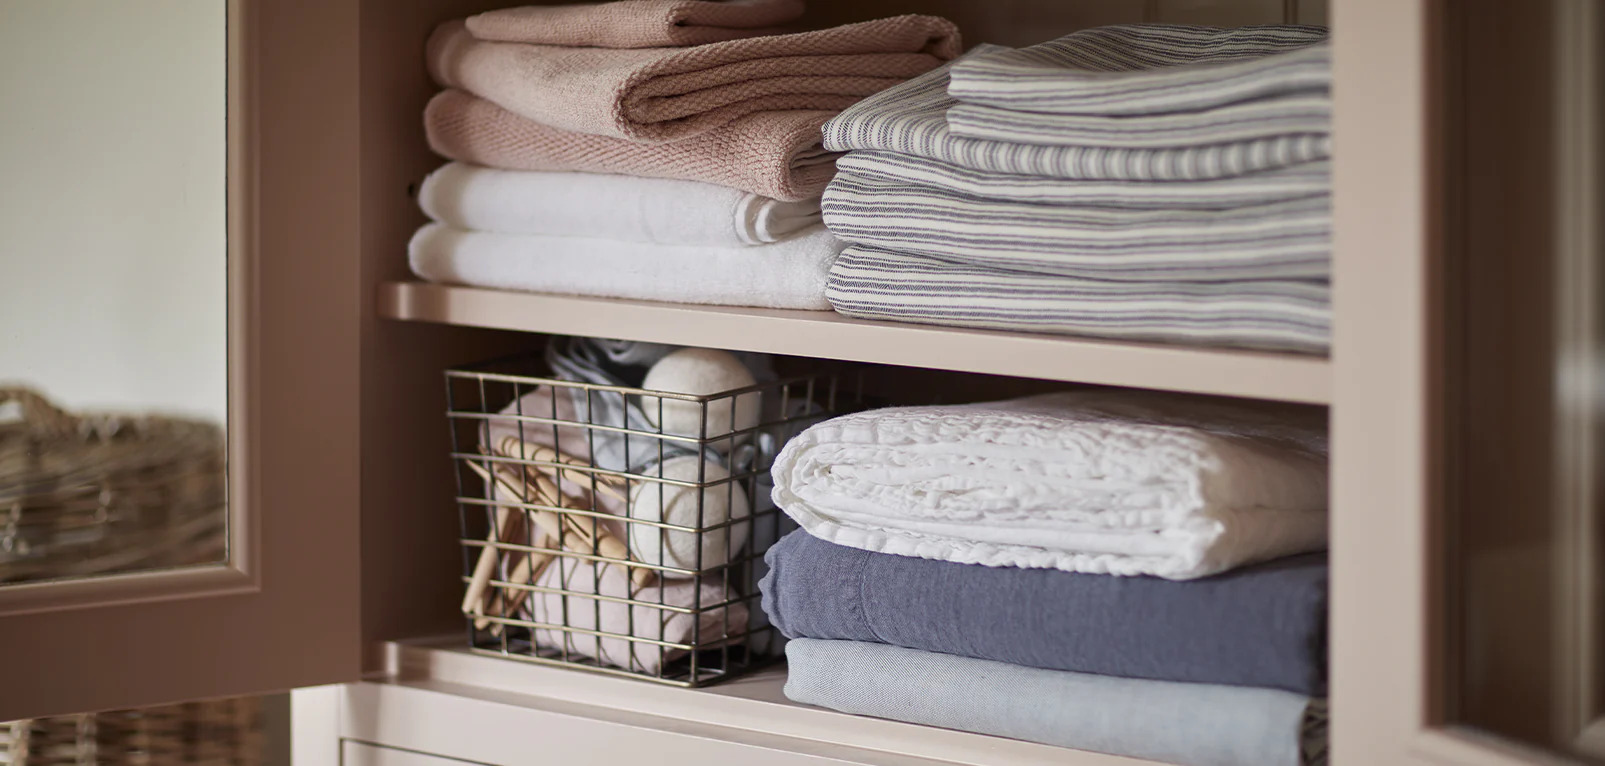 How To Store Sheets To Keep Them Fresh | Storables